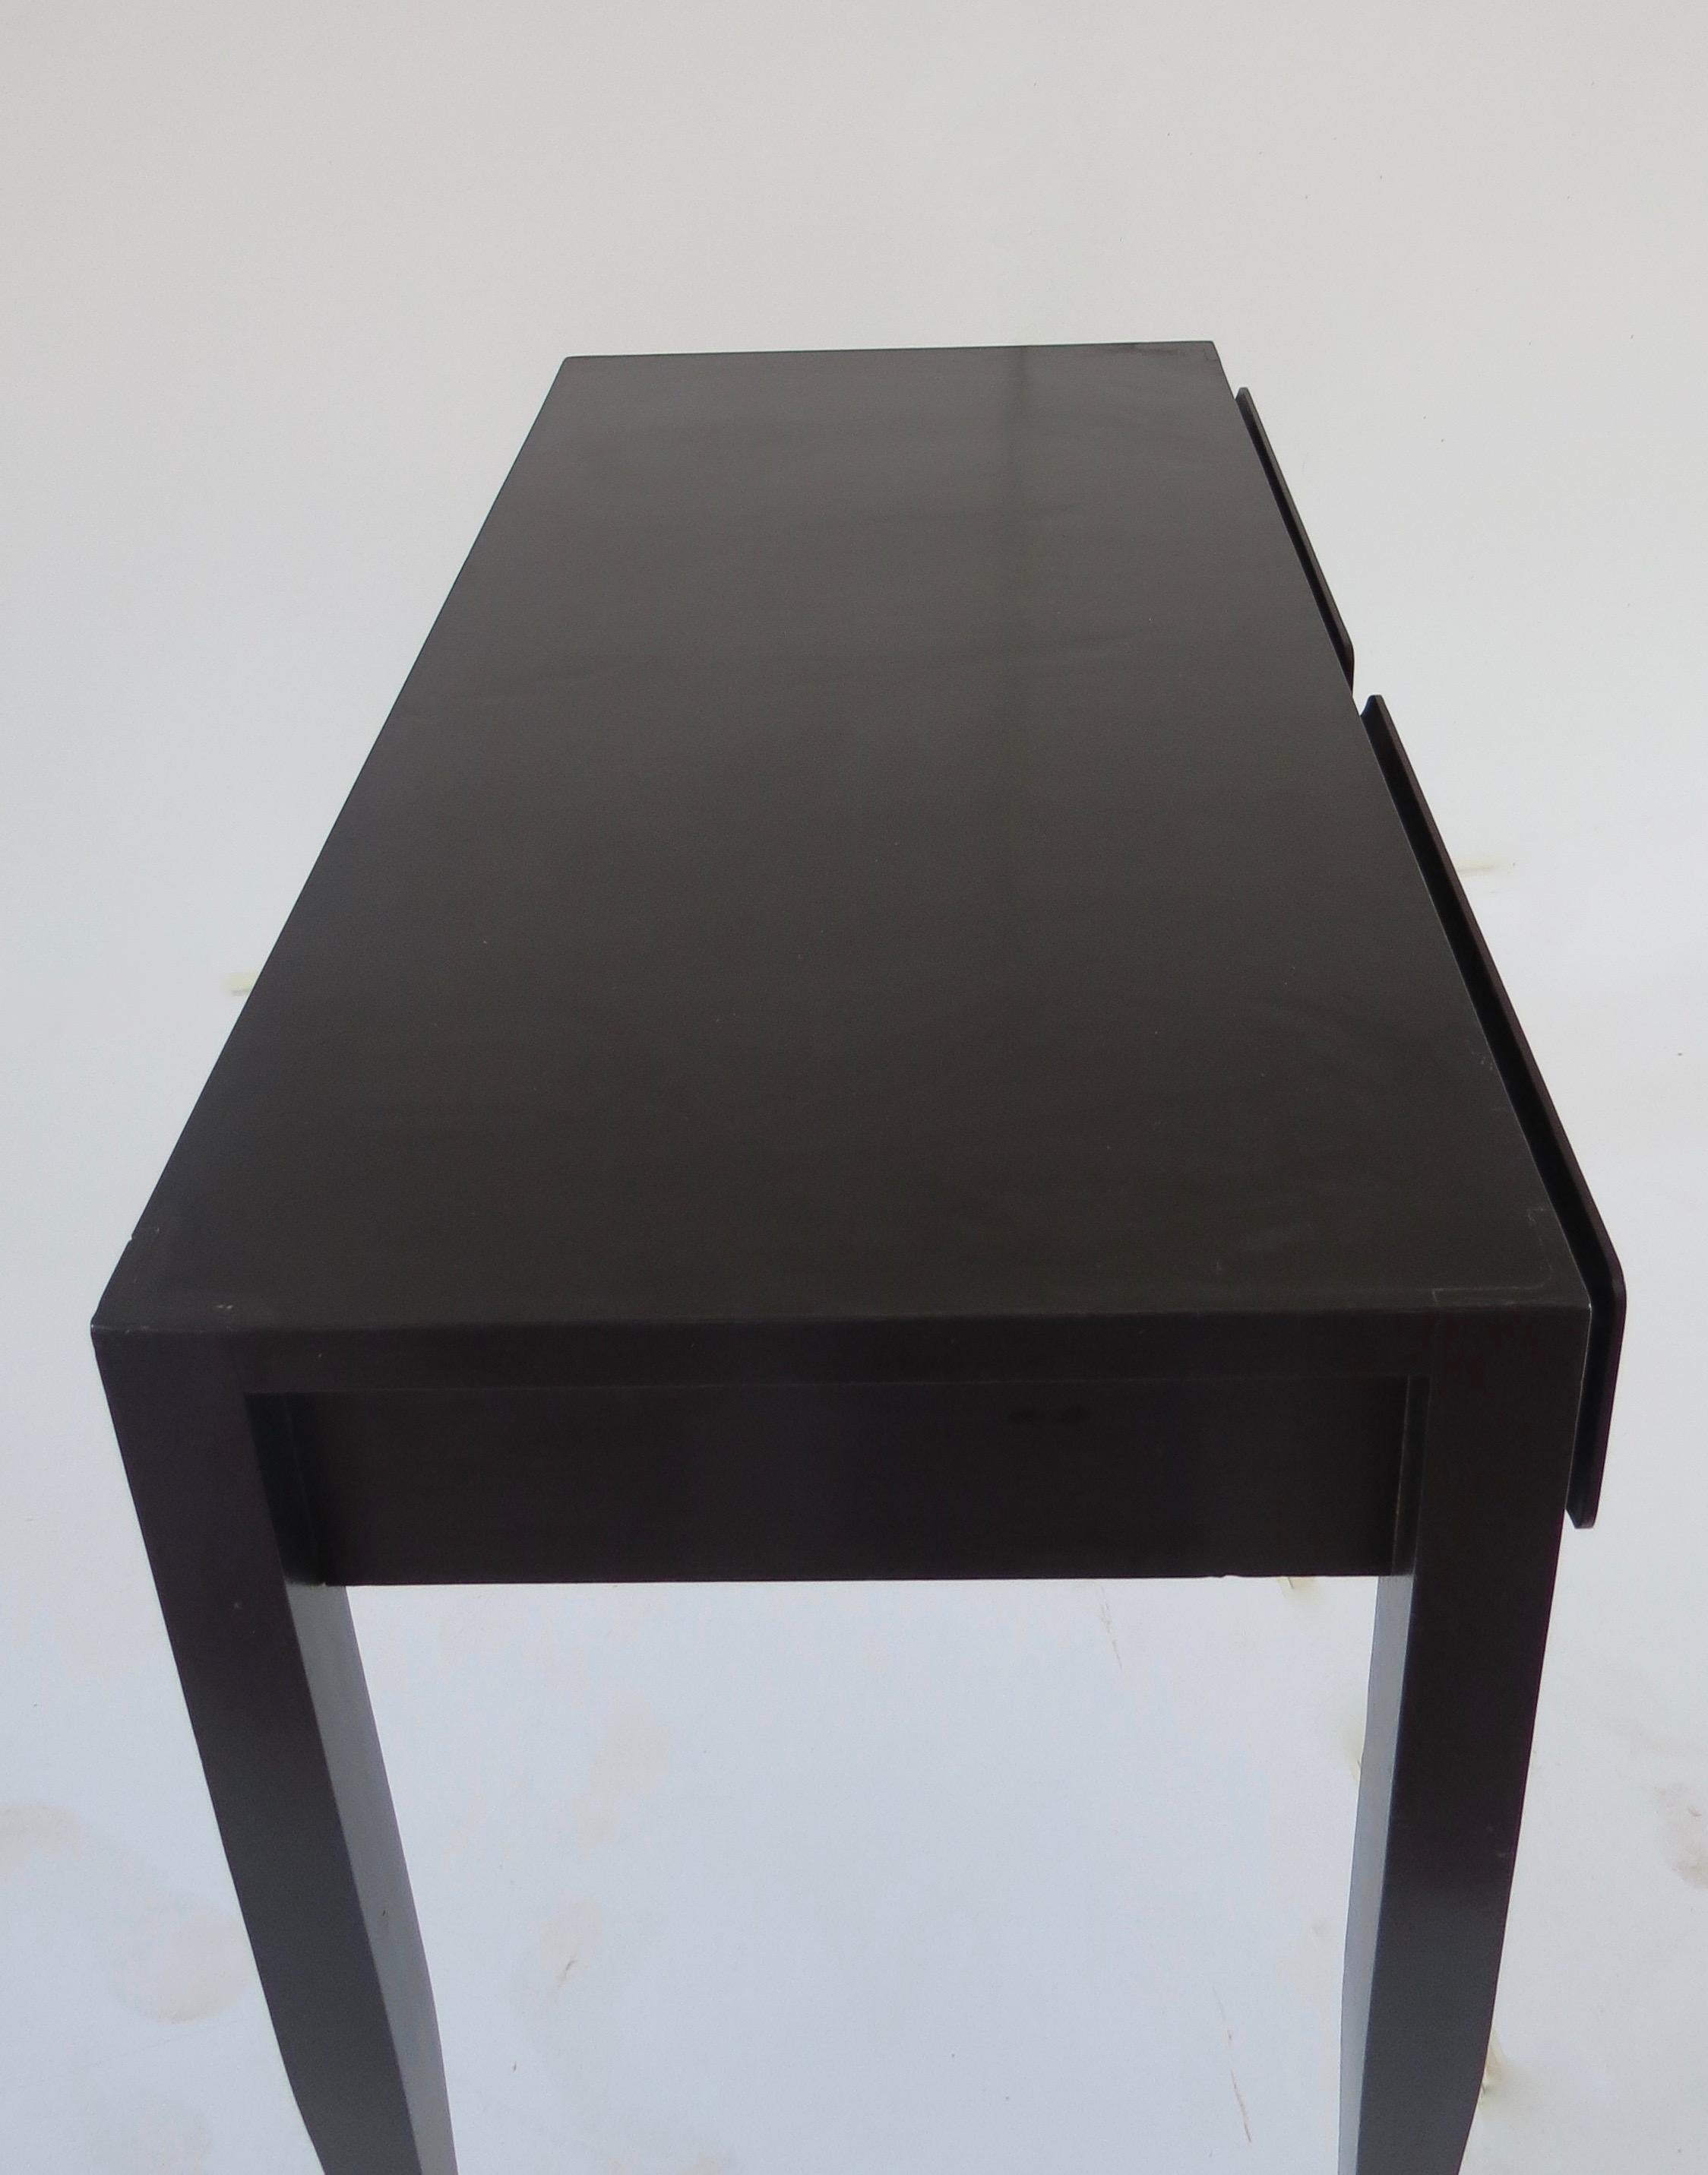 Italian Gio Ponti Black Lacquered Vanity Desk Table Two Drawers from Hotel PdP Roma 1965